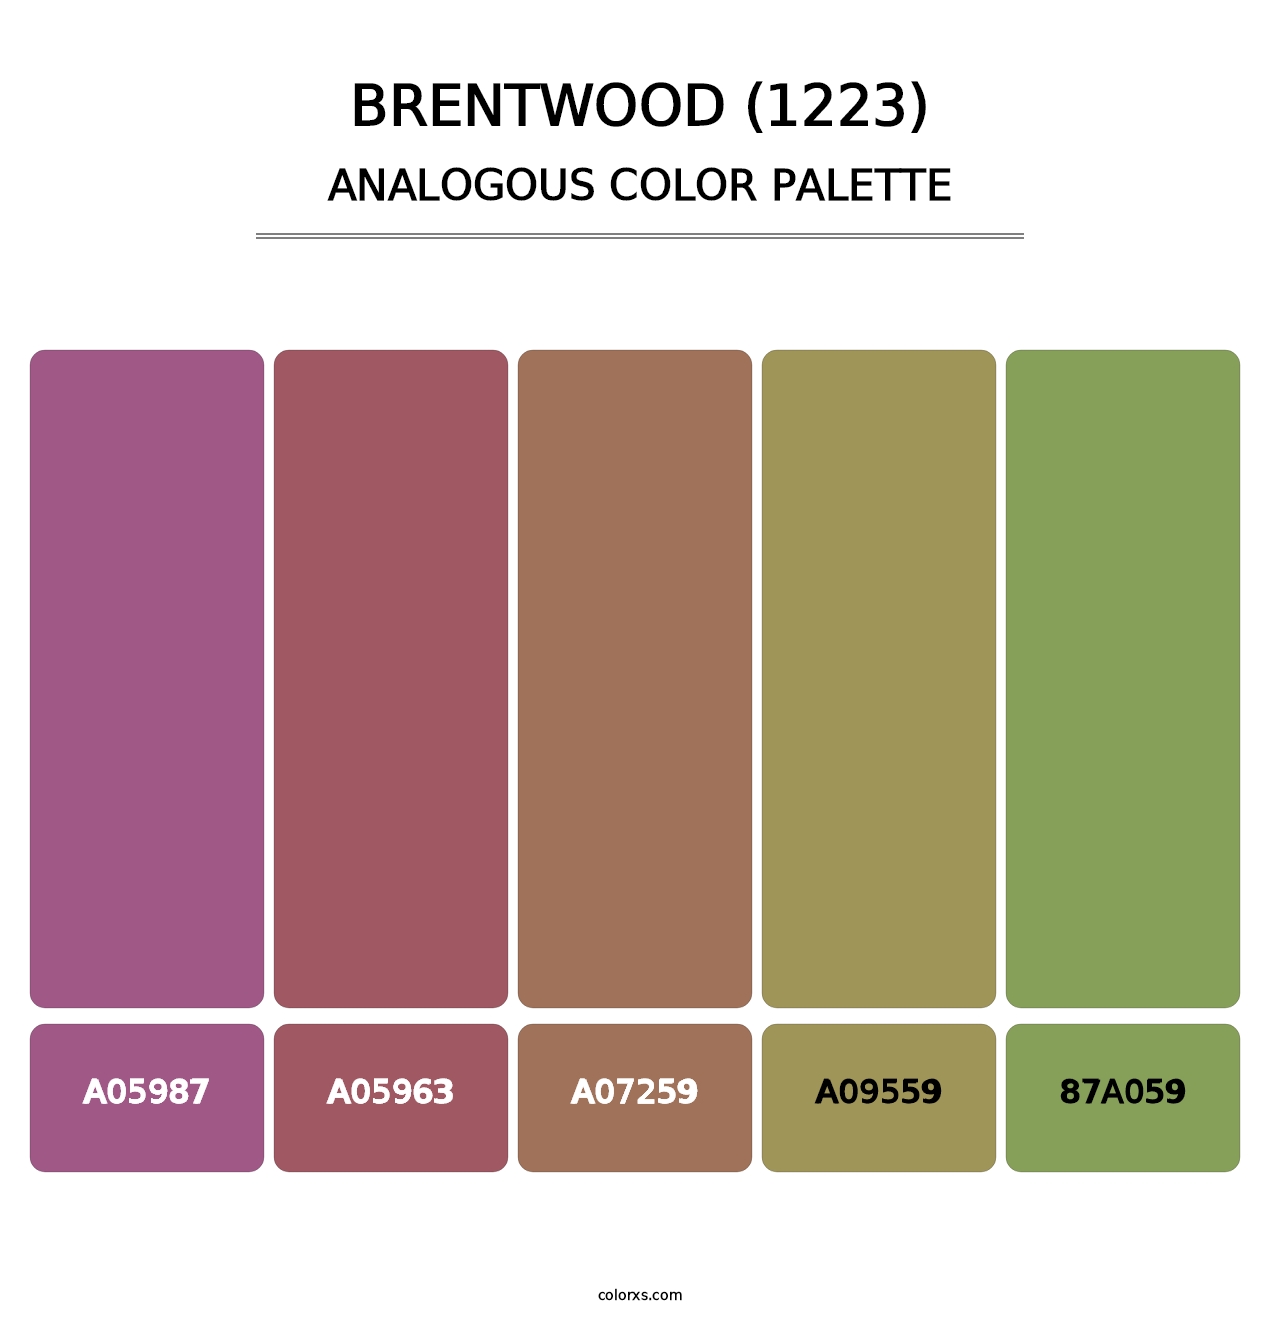 Brentwood (1223) - Analogous Color Palette